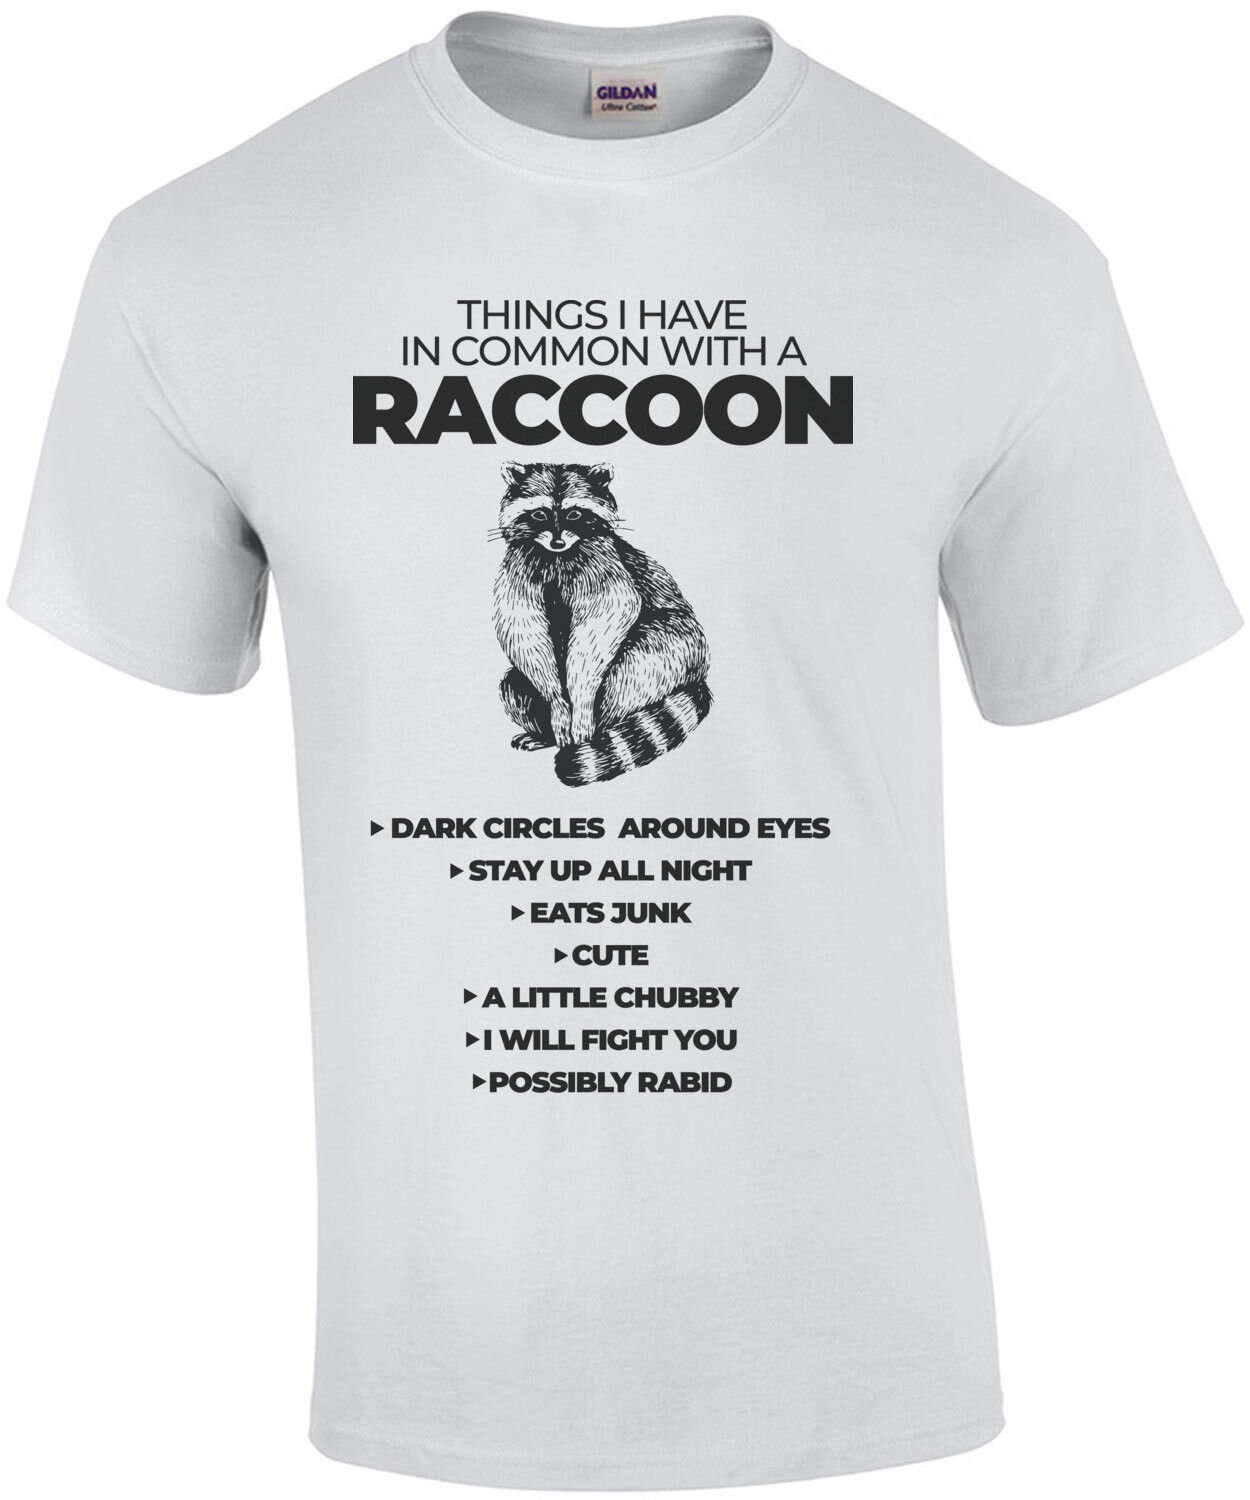 Things I have common with a raccoon - Dark circles around eyes - Stays up all night - funny ladies t-shirt